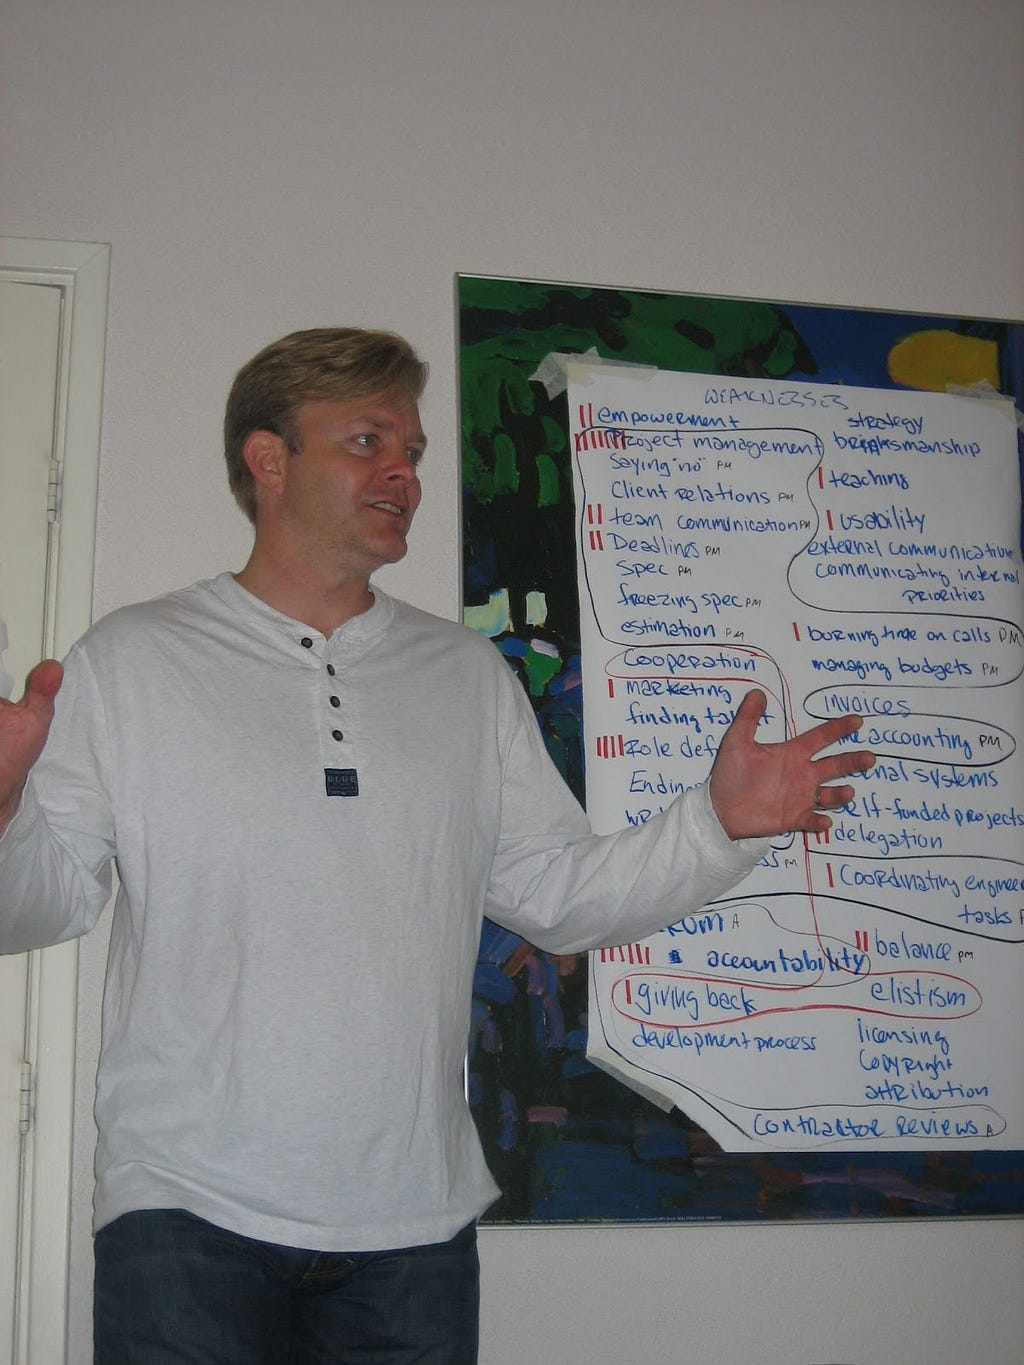 CivicActions Co-founder and CEO Henry Poole in 2005 standing in front of a white board with writing on it